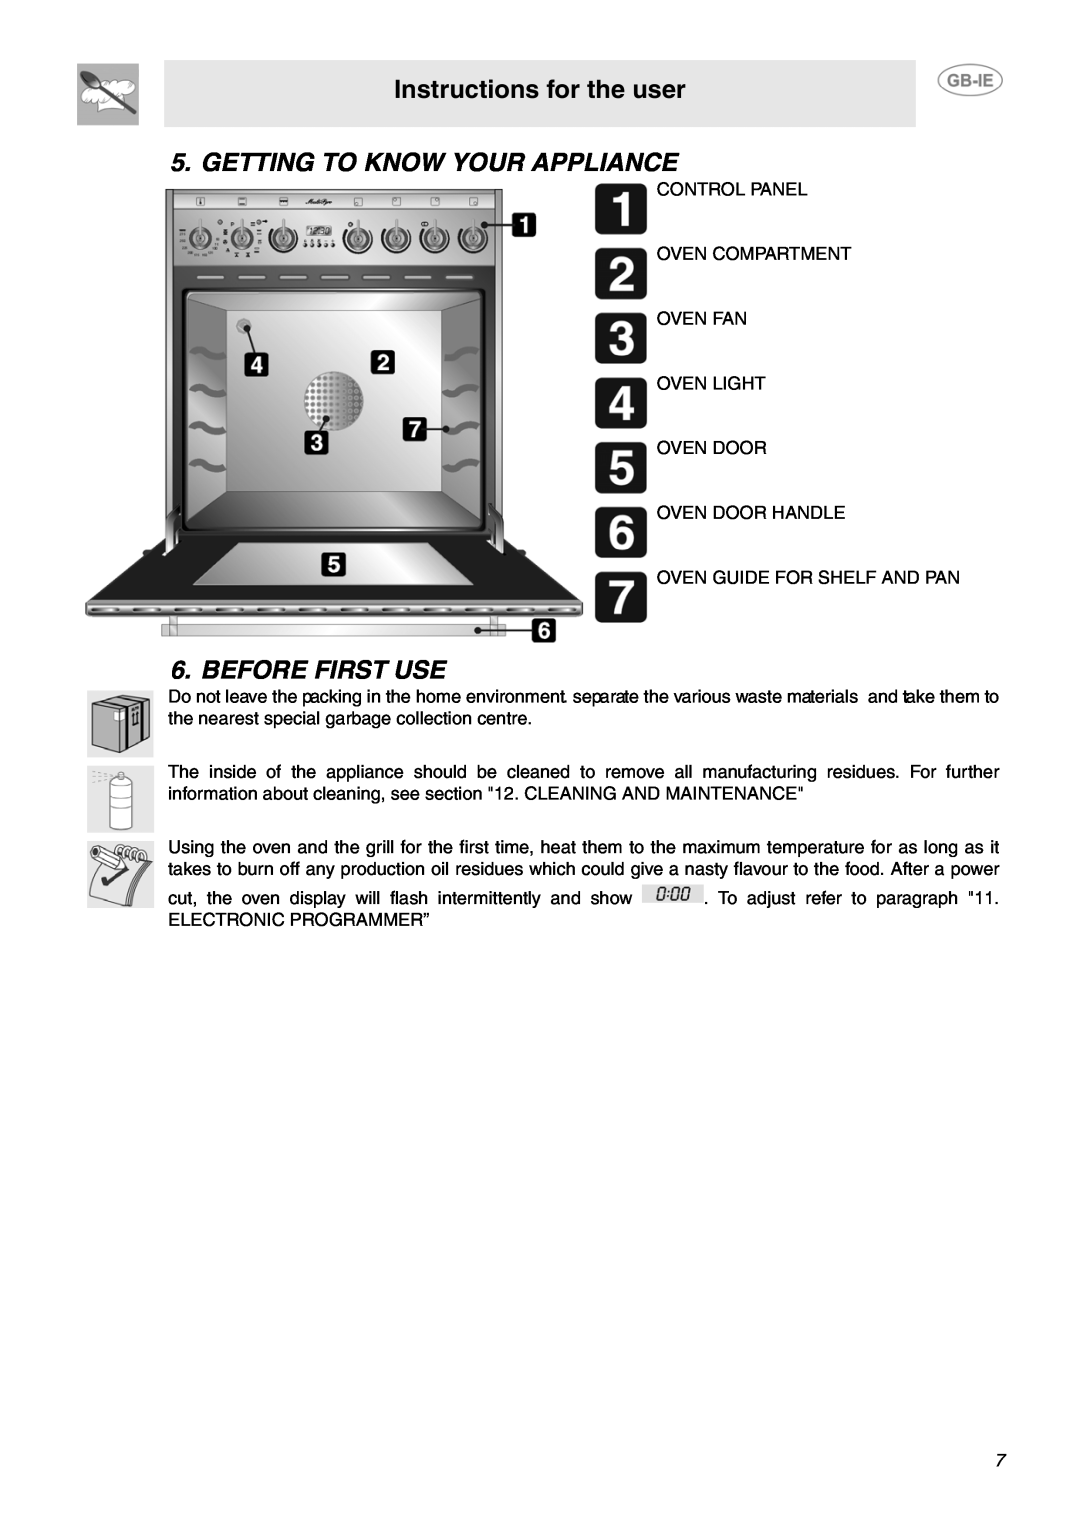 Smeg SUK61CPX5 manual Instructions for the user, Getting To Know Your Appliance, Before First Use 